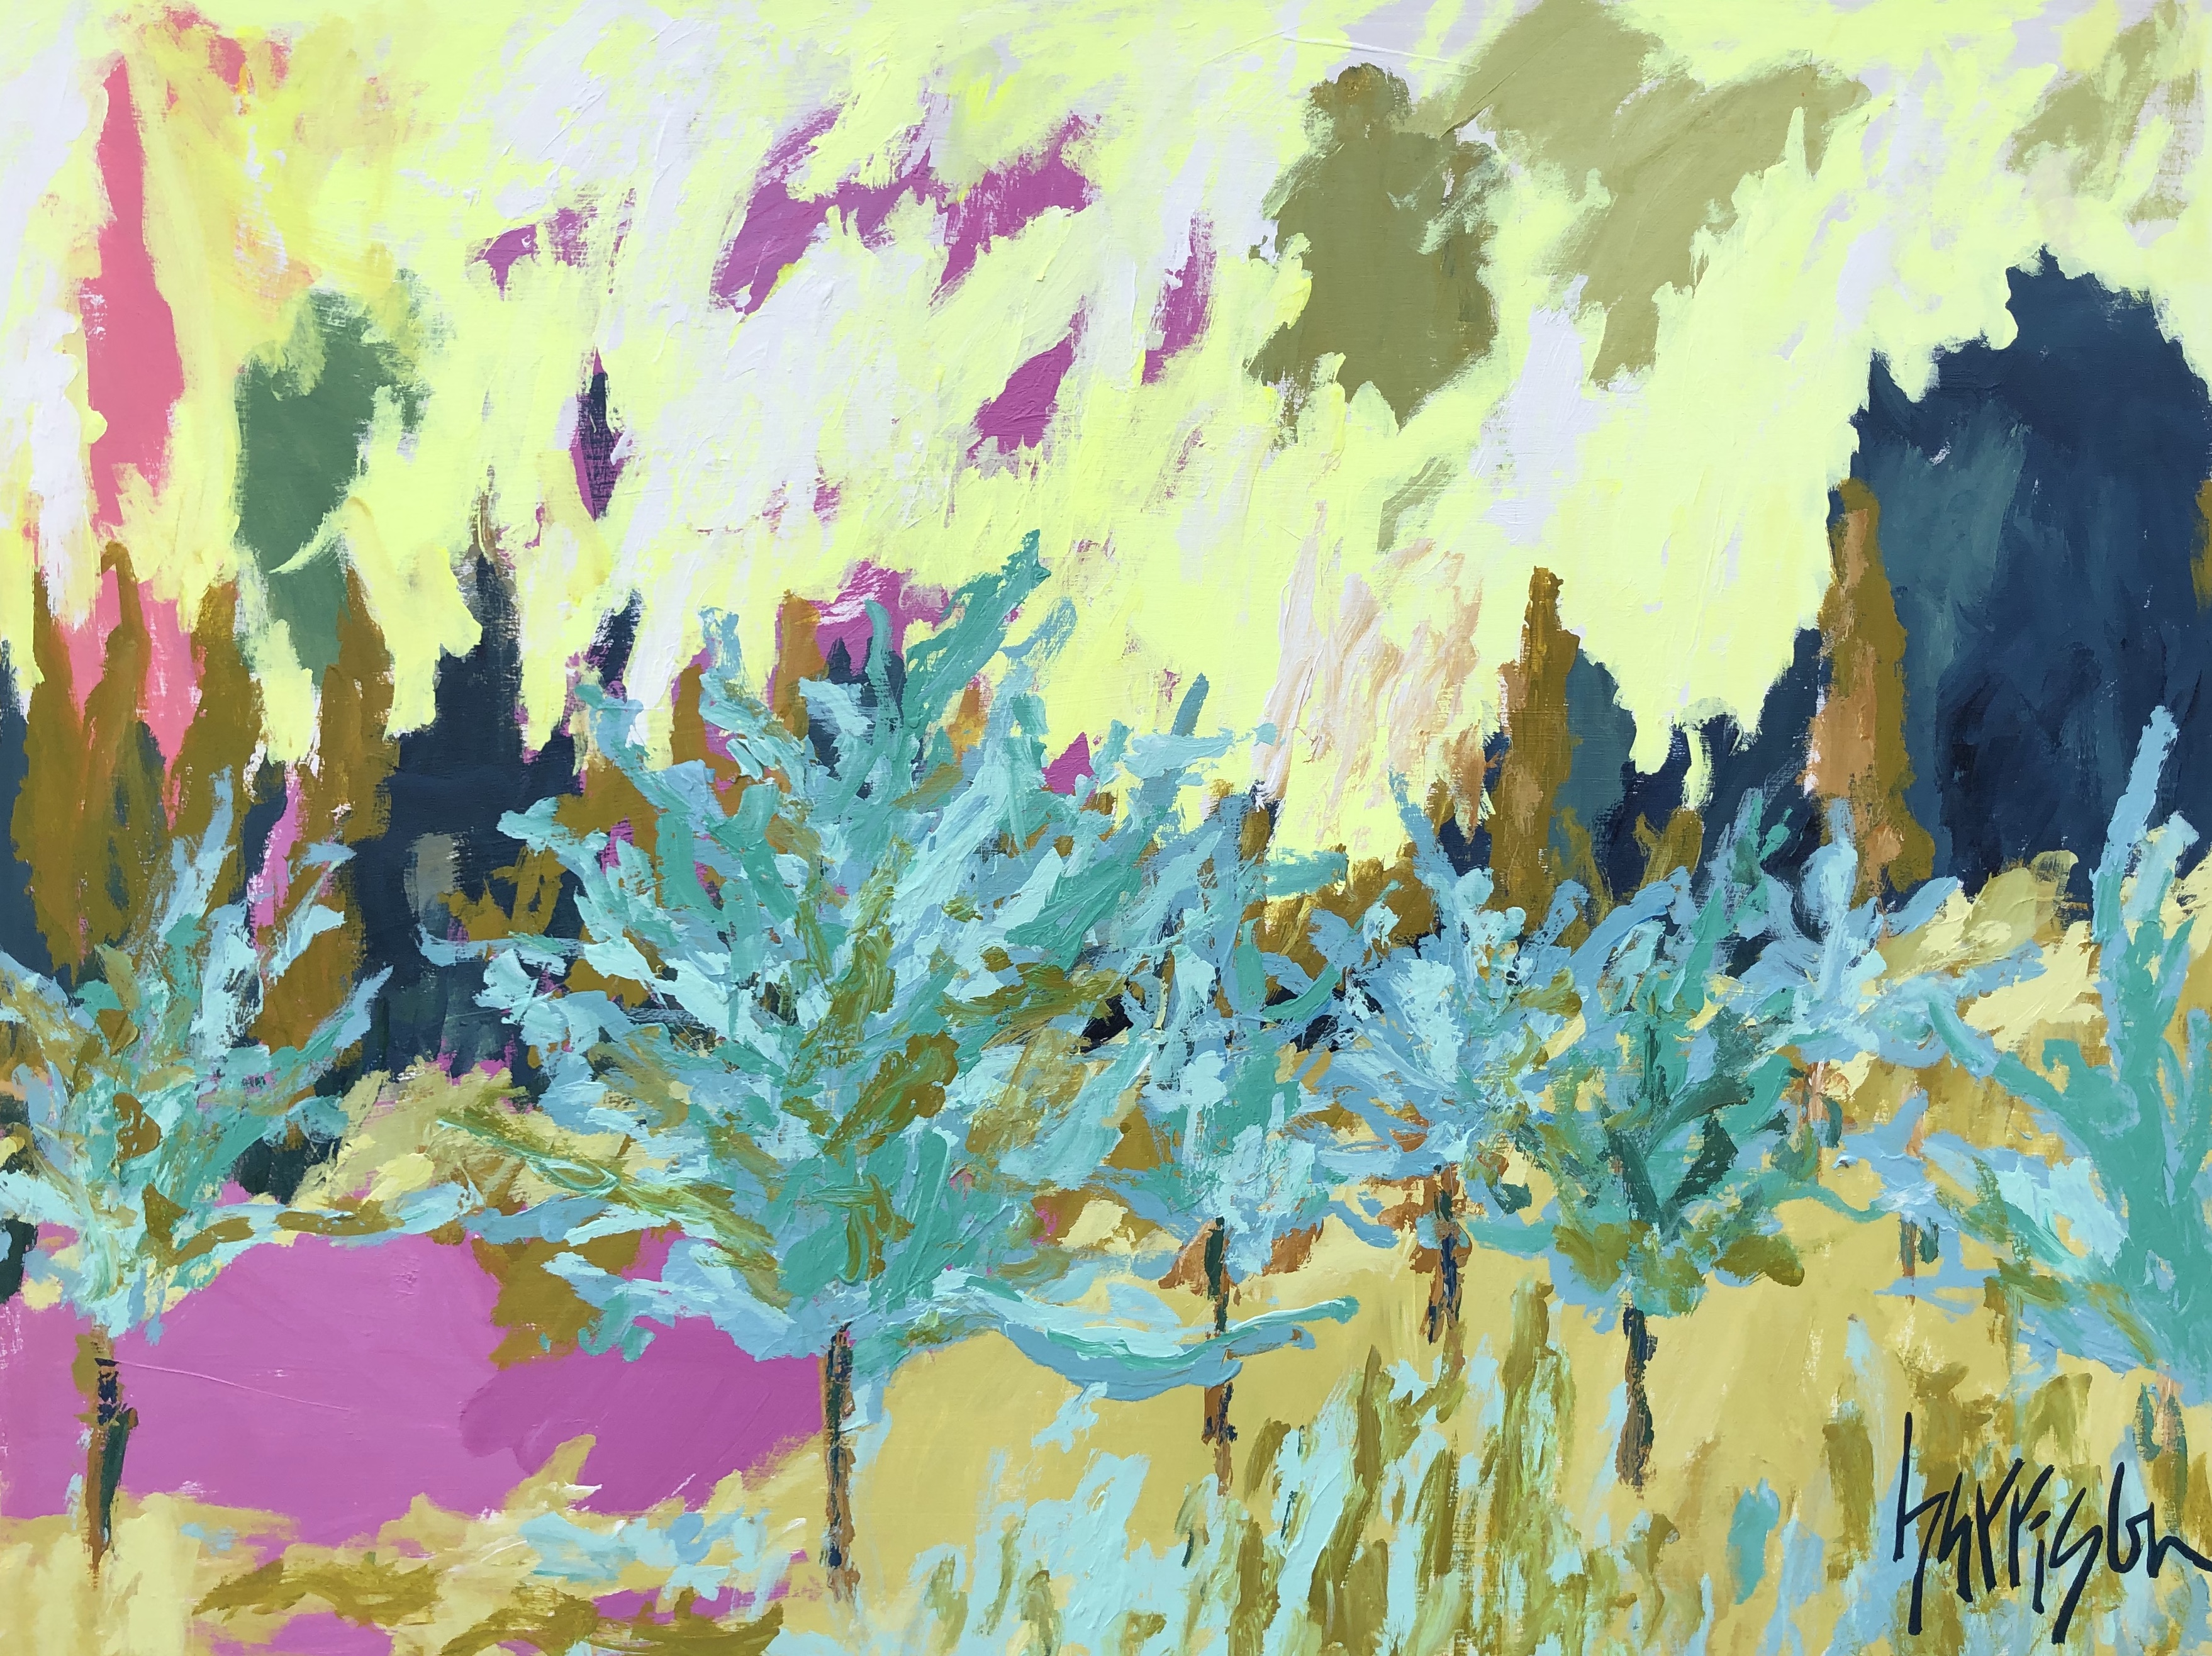 FIELDS OF PROVENCE 5 - 30x40